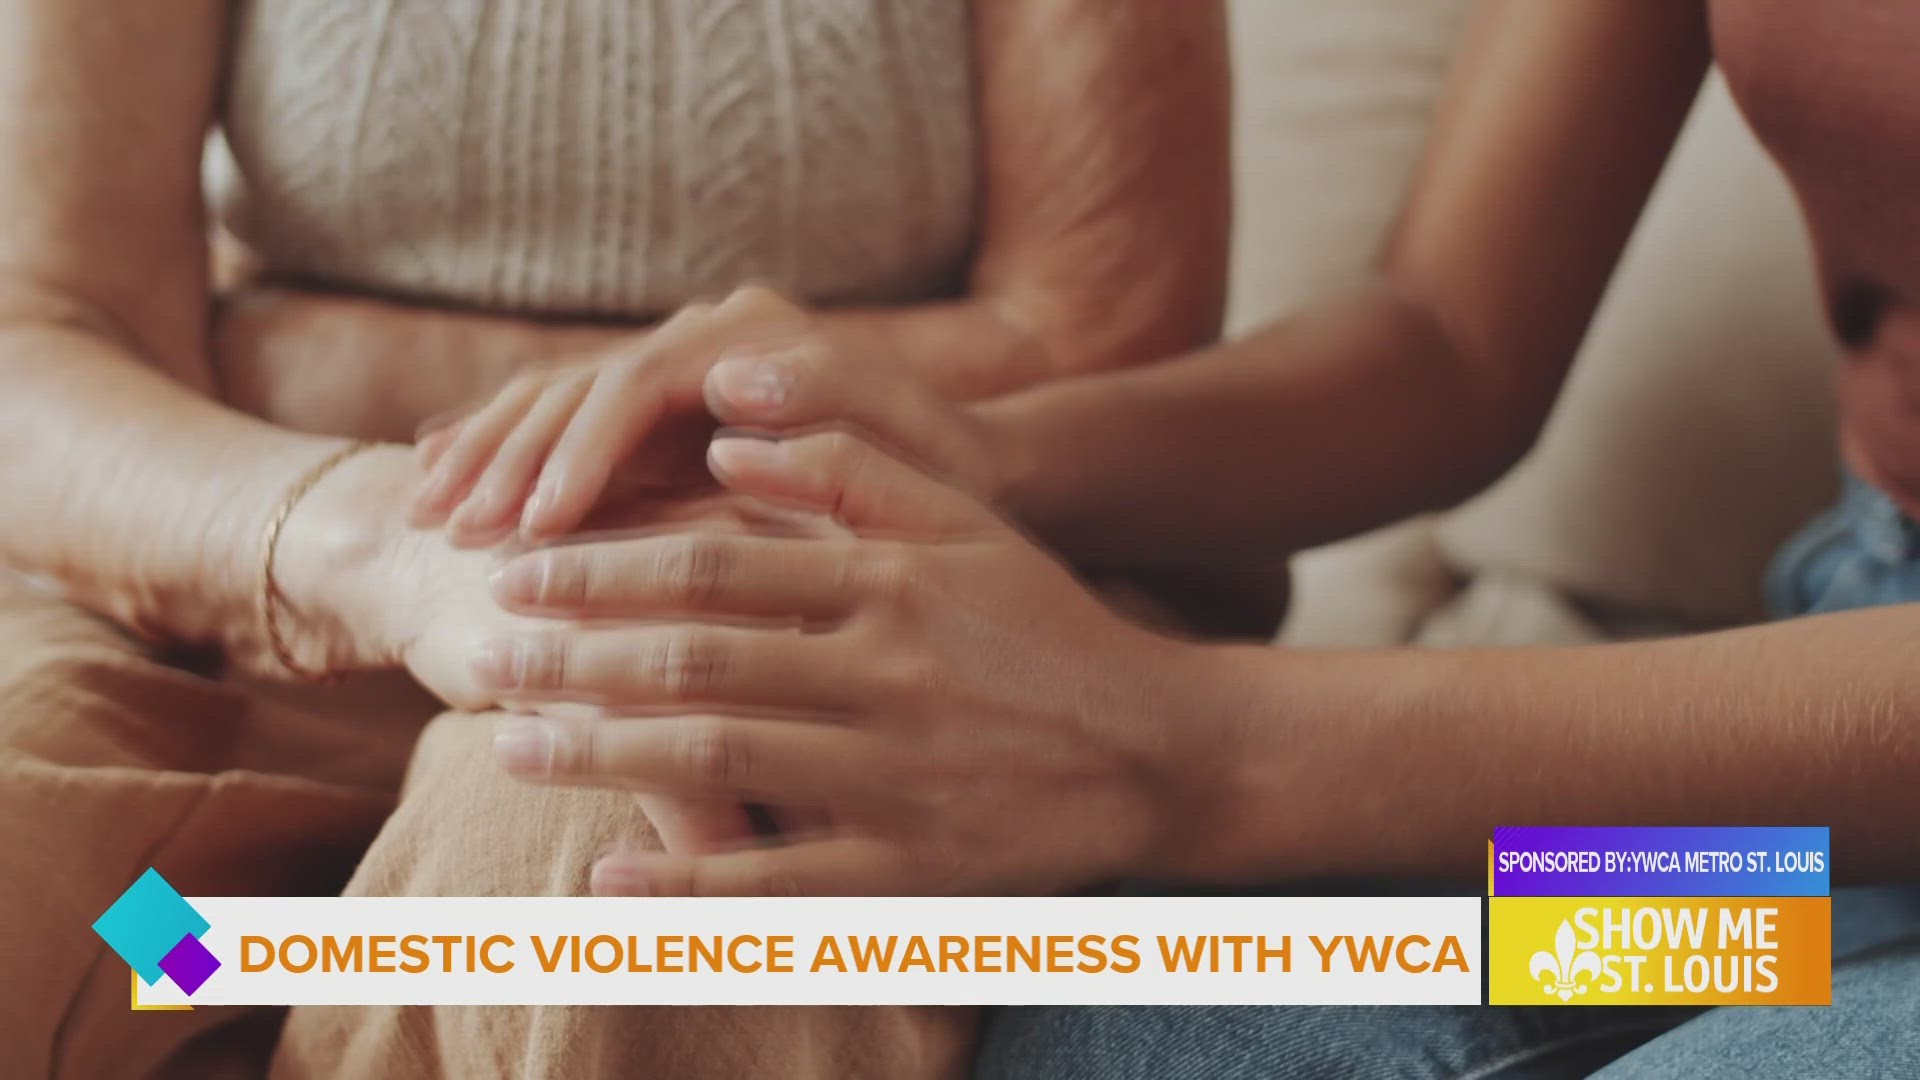 This Domestic Violence Awareness Month, the YWCA Metro St. Louis wants to remind the community about their free resources and crisis hotline, 314-531-7273.